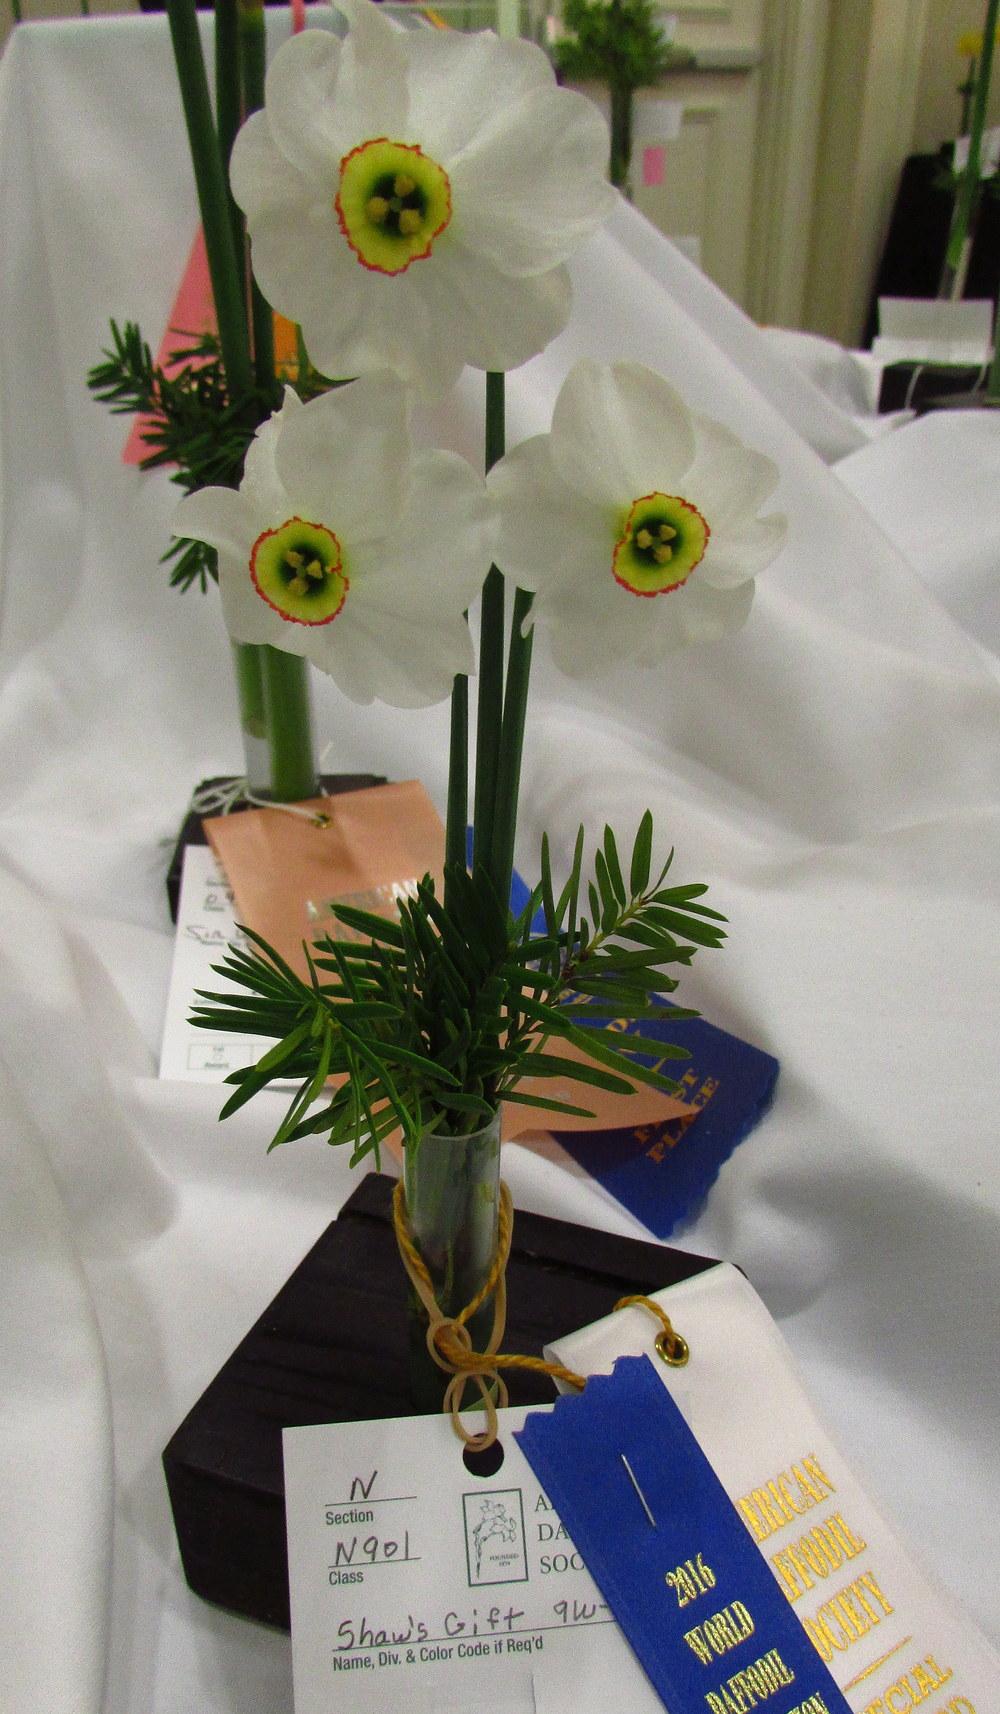 Photo of Poeticus Daffodil (Narcissus 'Shaw's Gift') uploaded by jmorth